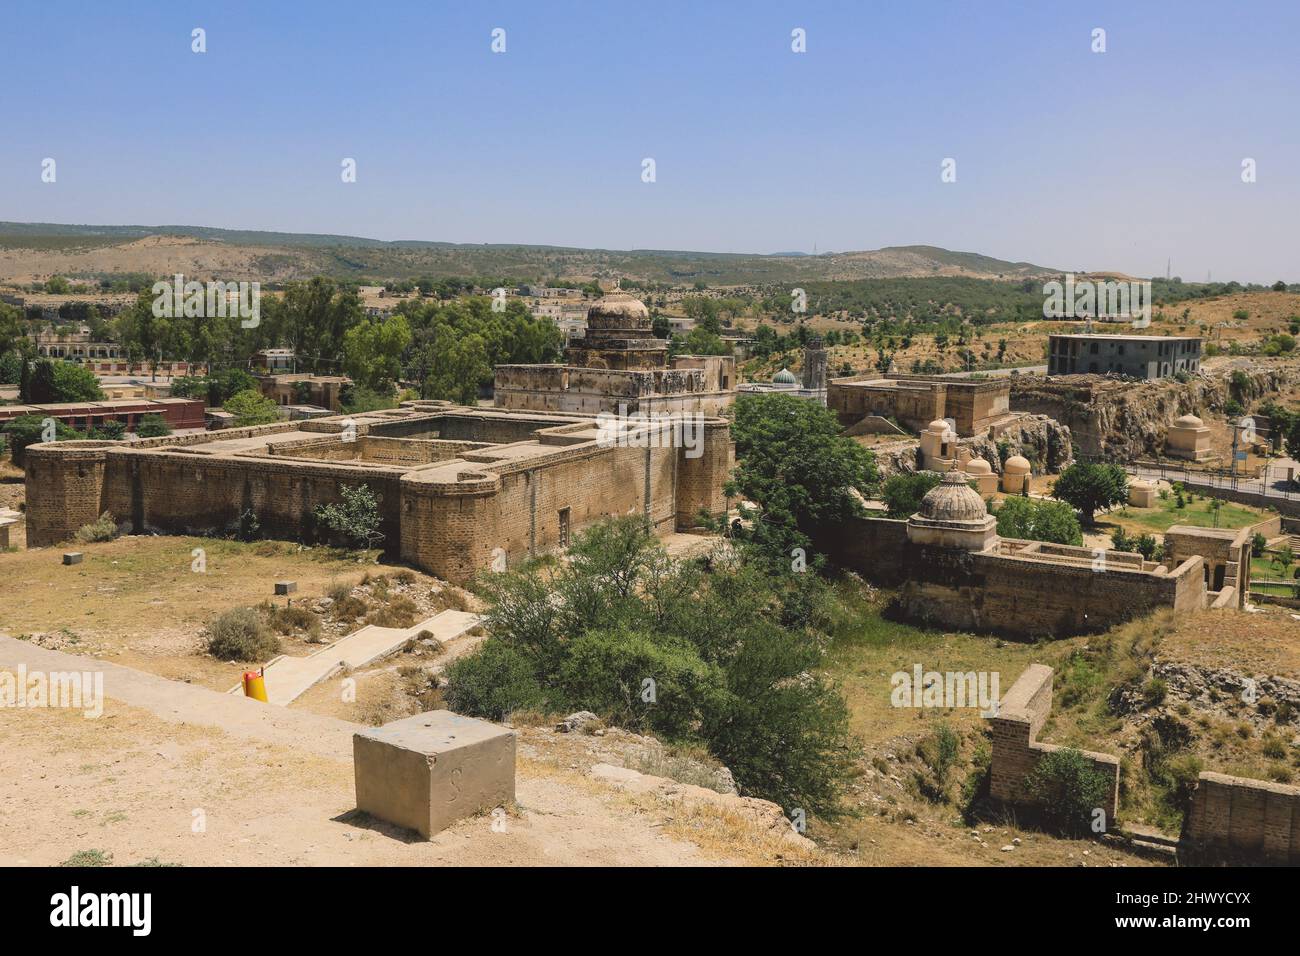 Panoramic View to the Ruins of the Shri Katas Raj Temples, also known as Qila Katas, complex of several Hindu temples in Punjab province, Pakistan Stock Photo